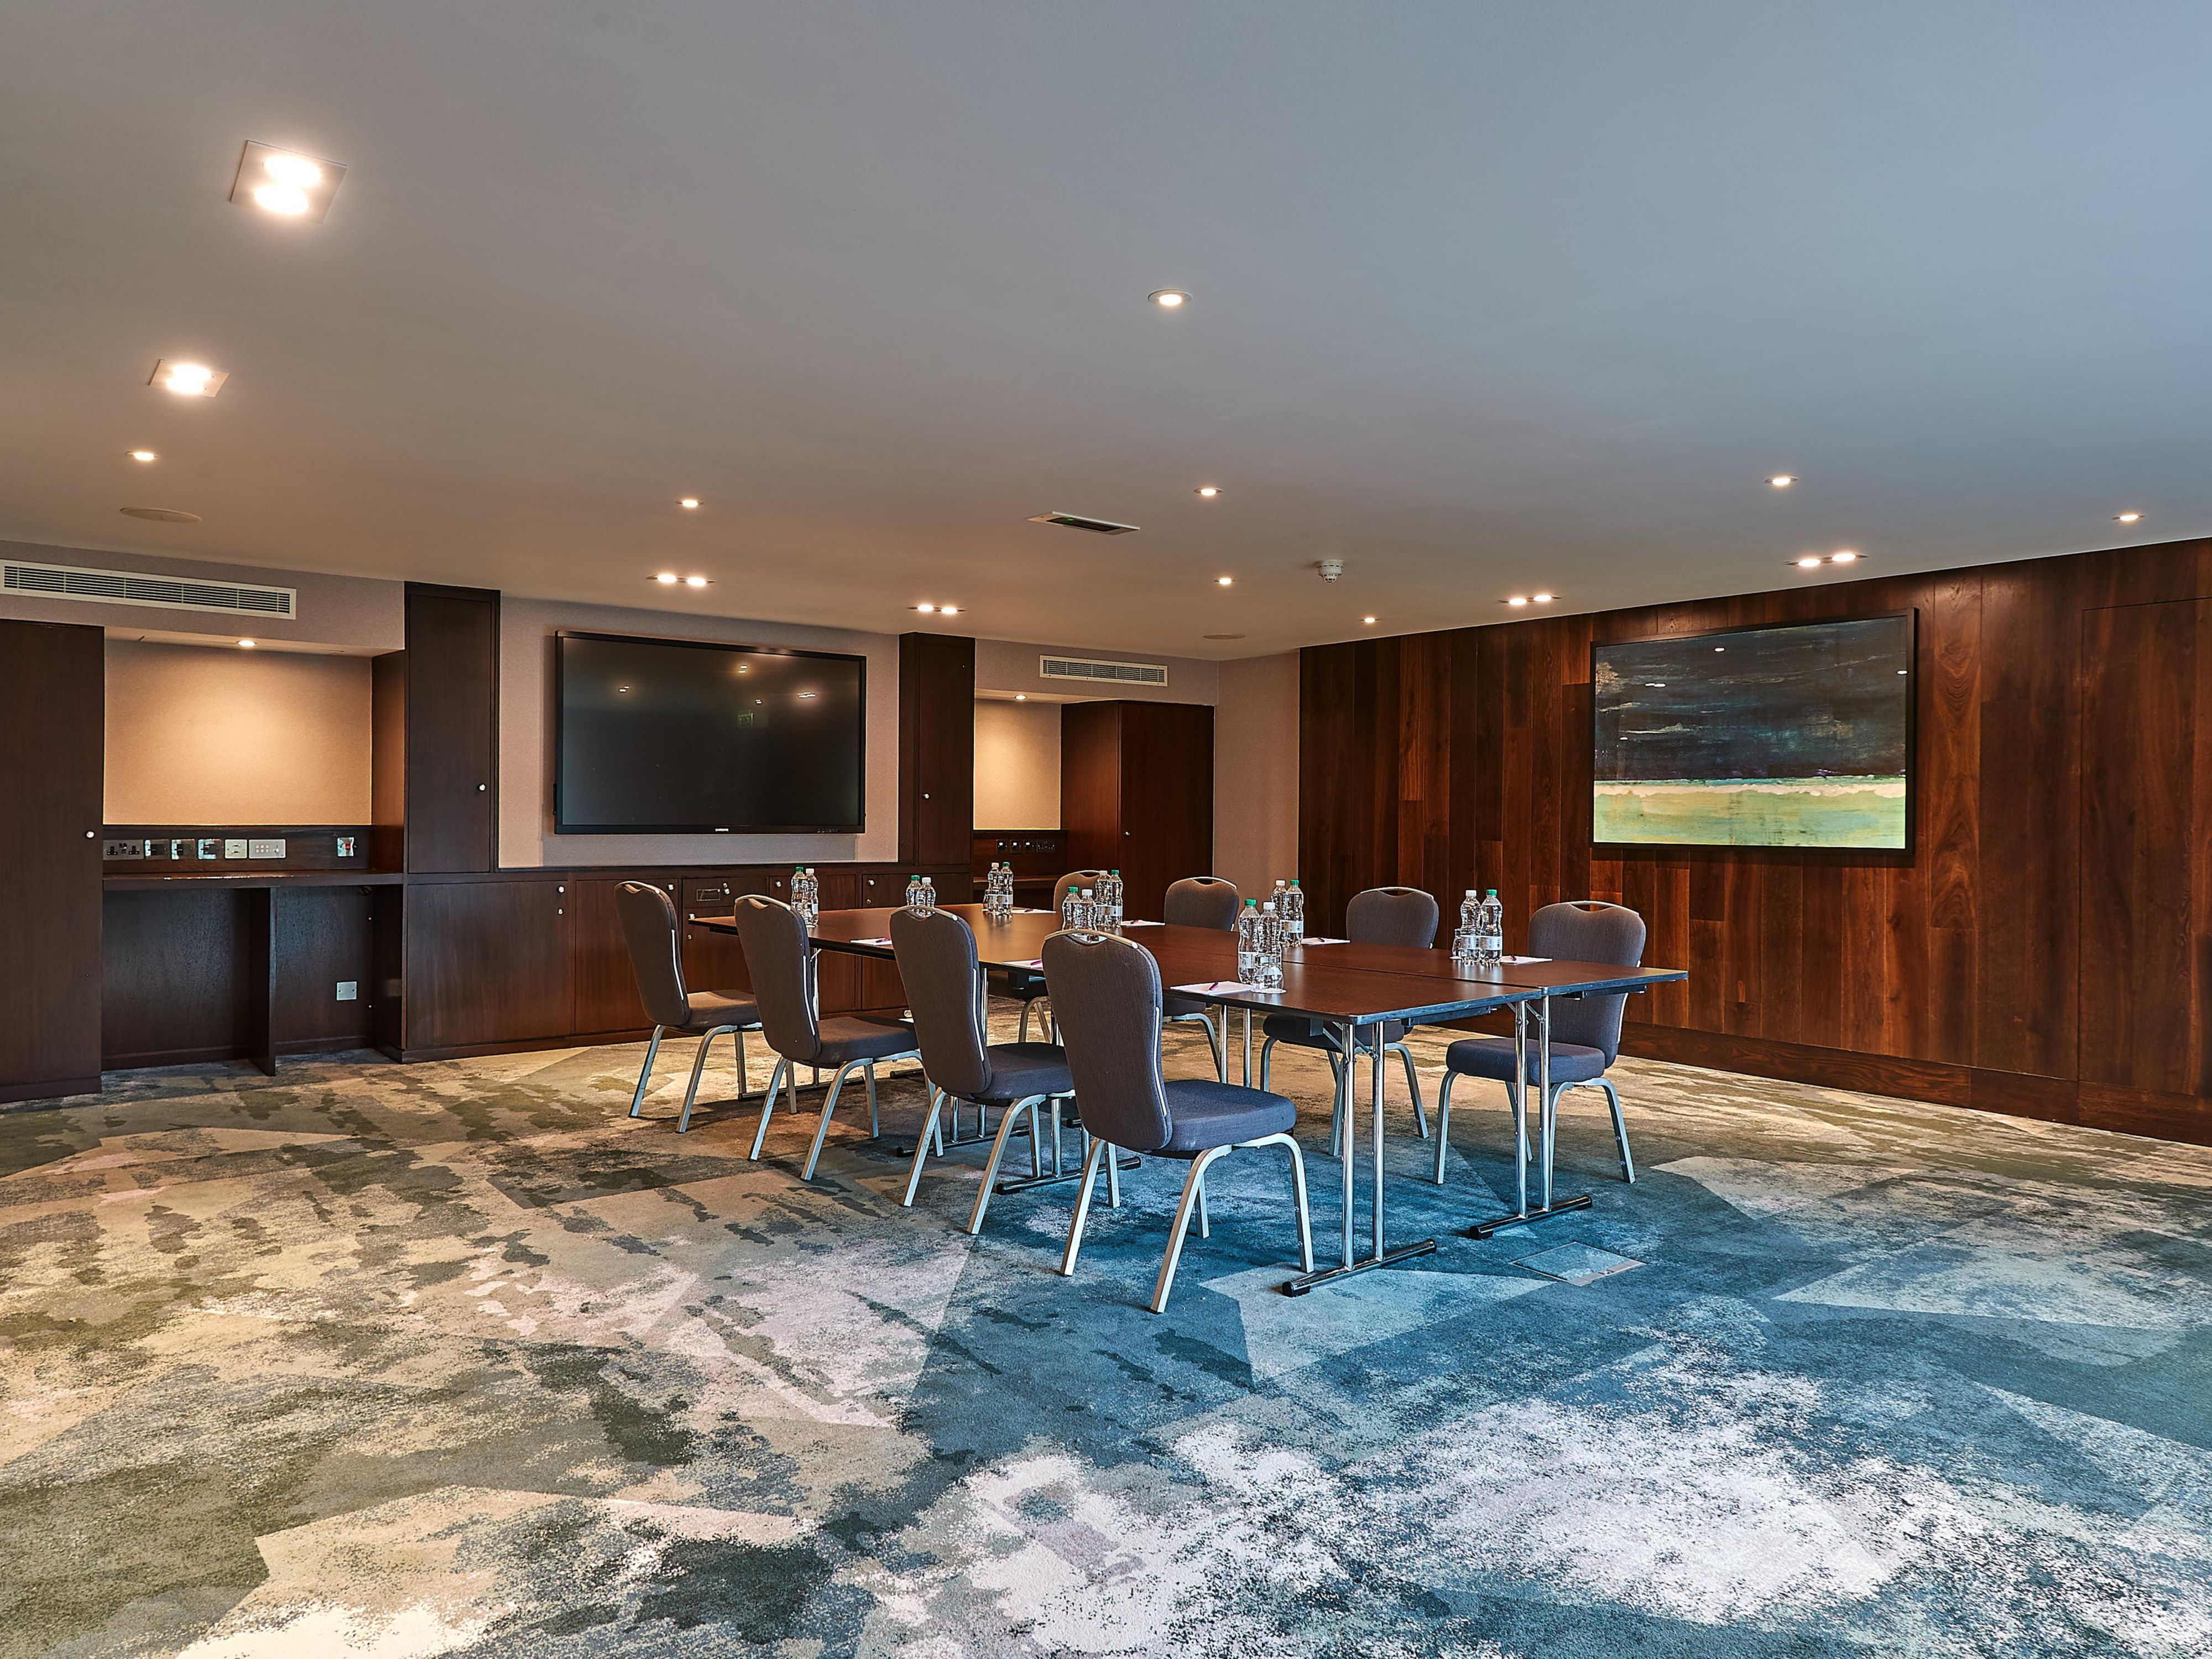 Exclusive to Crowne Plaza Marlow is the innovative CMS (Creative Meeting Space). Its interactive tools and flexible working environment inspire and encourage creative planning and idea generation.